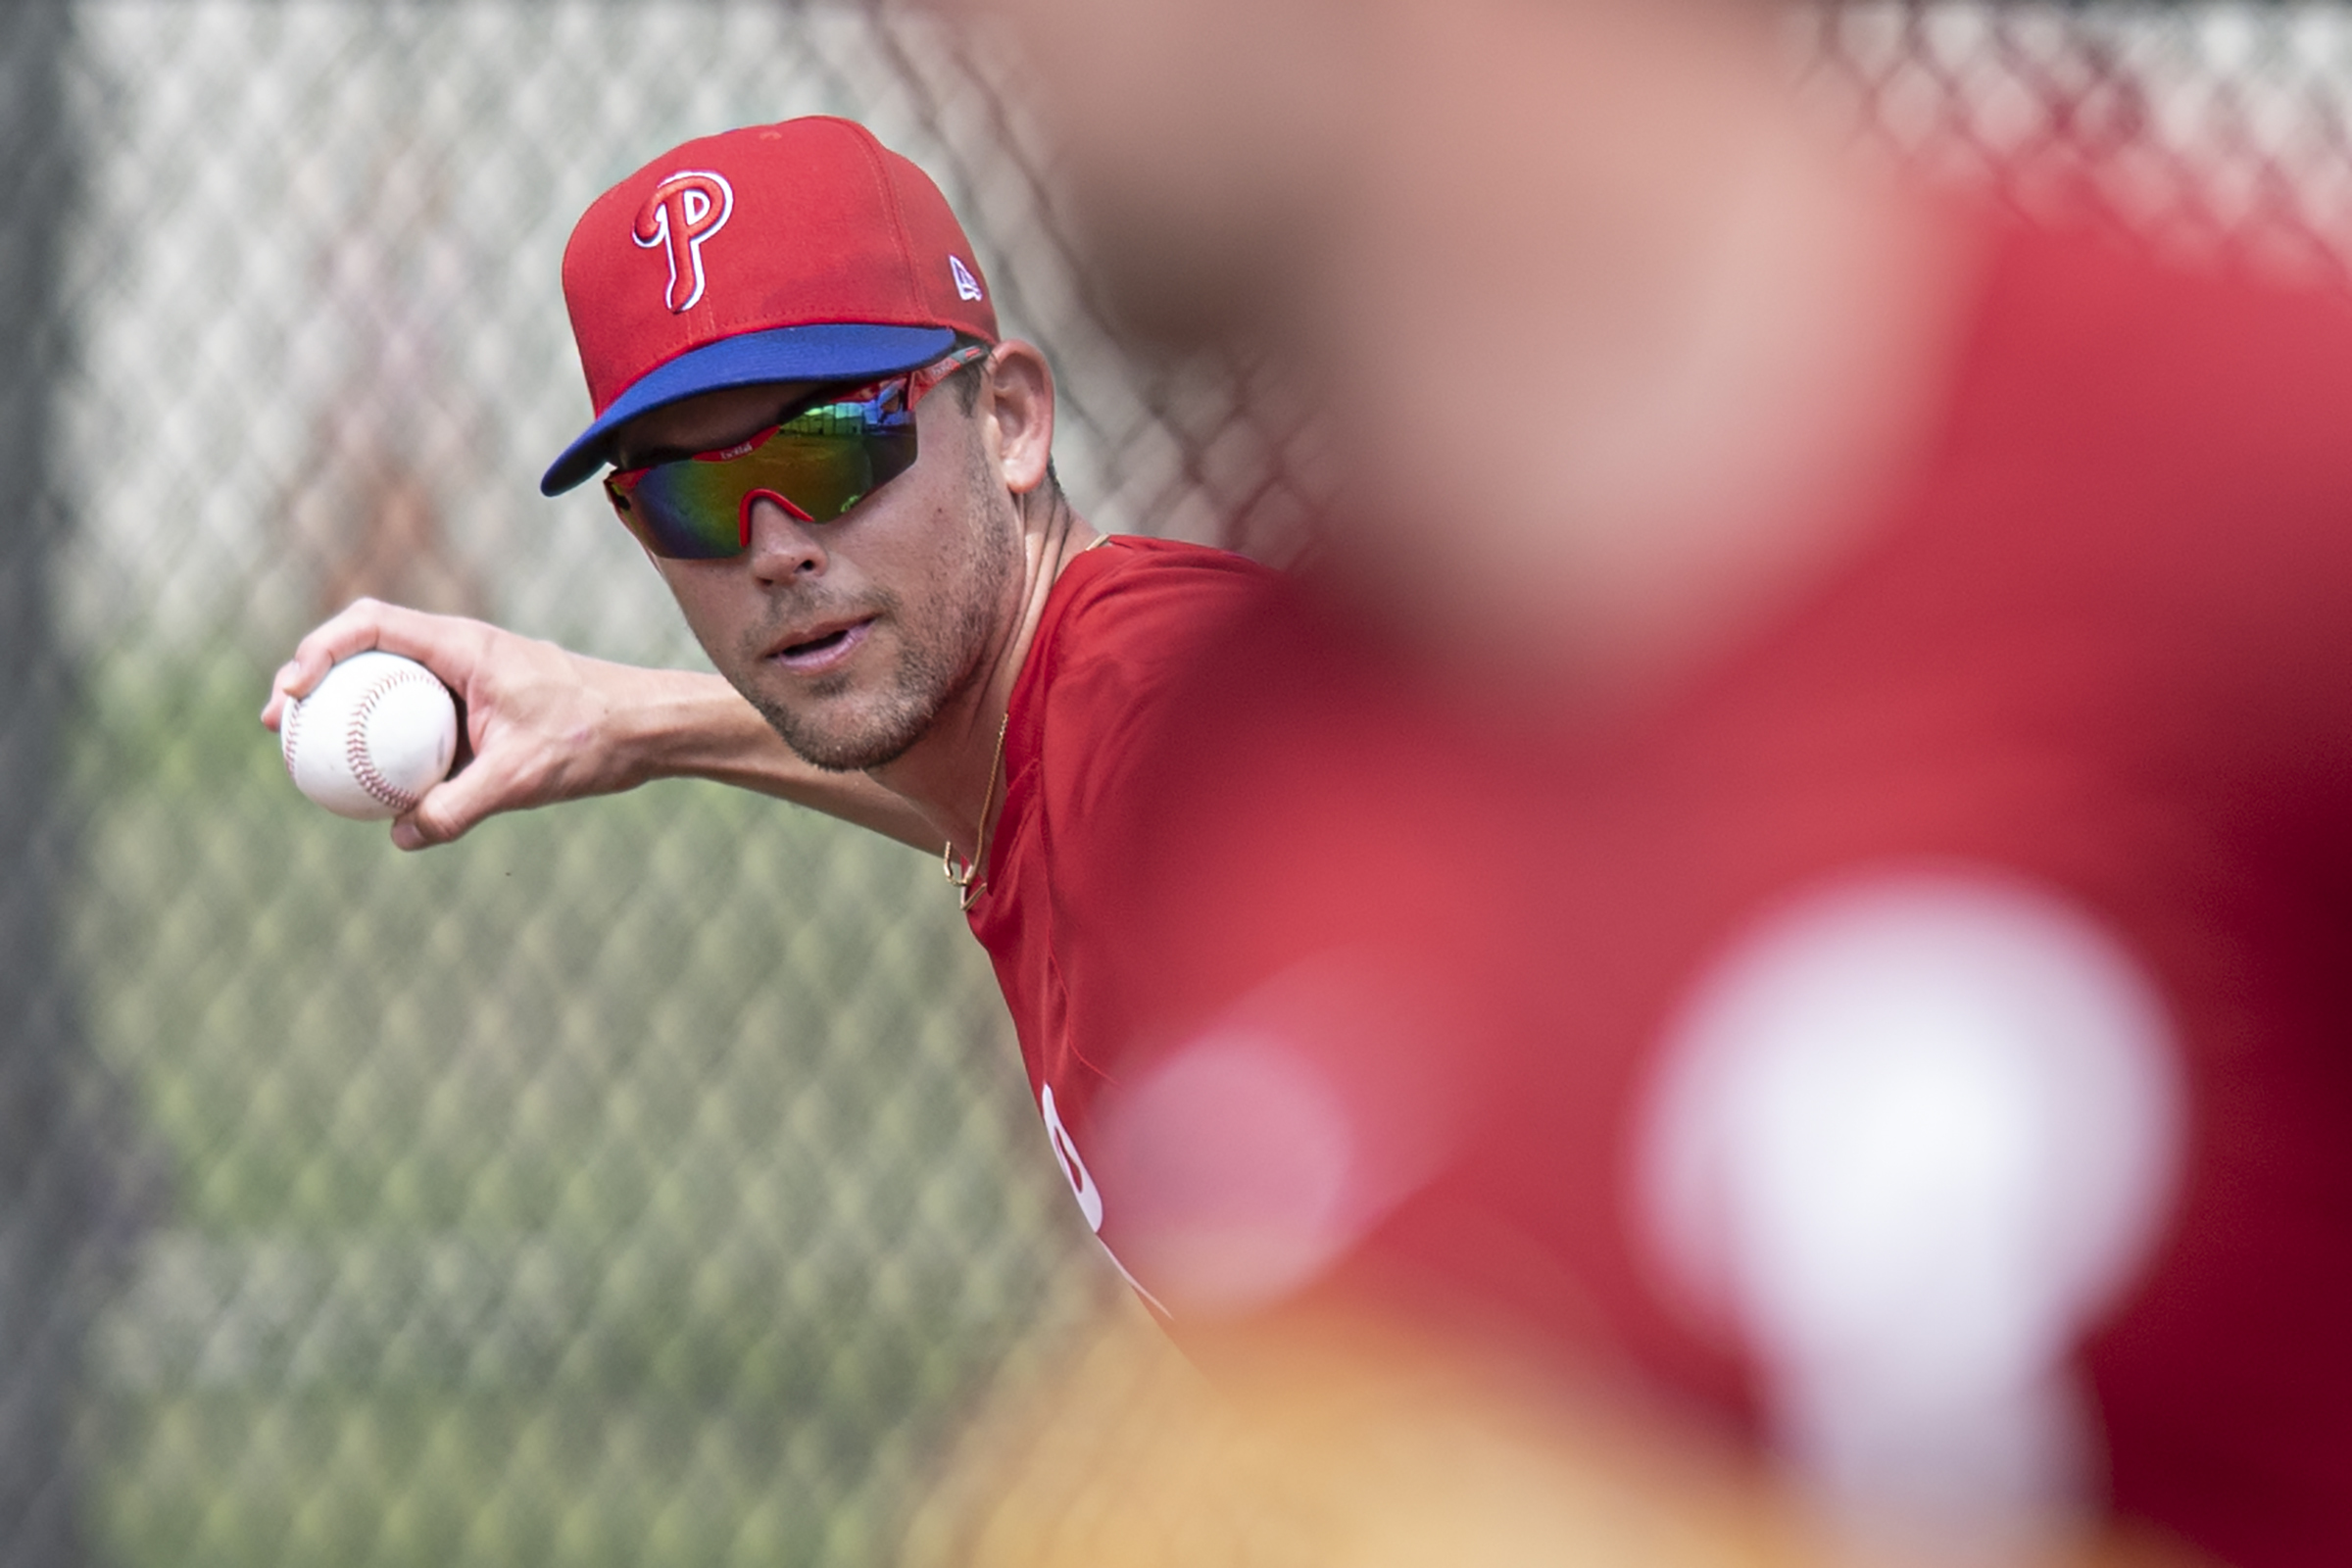 Scott Kingery was poised to be the Phillies' next star. Now he hopes